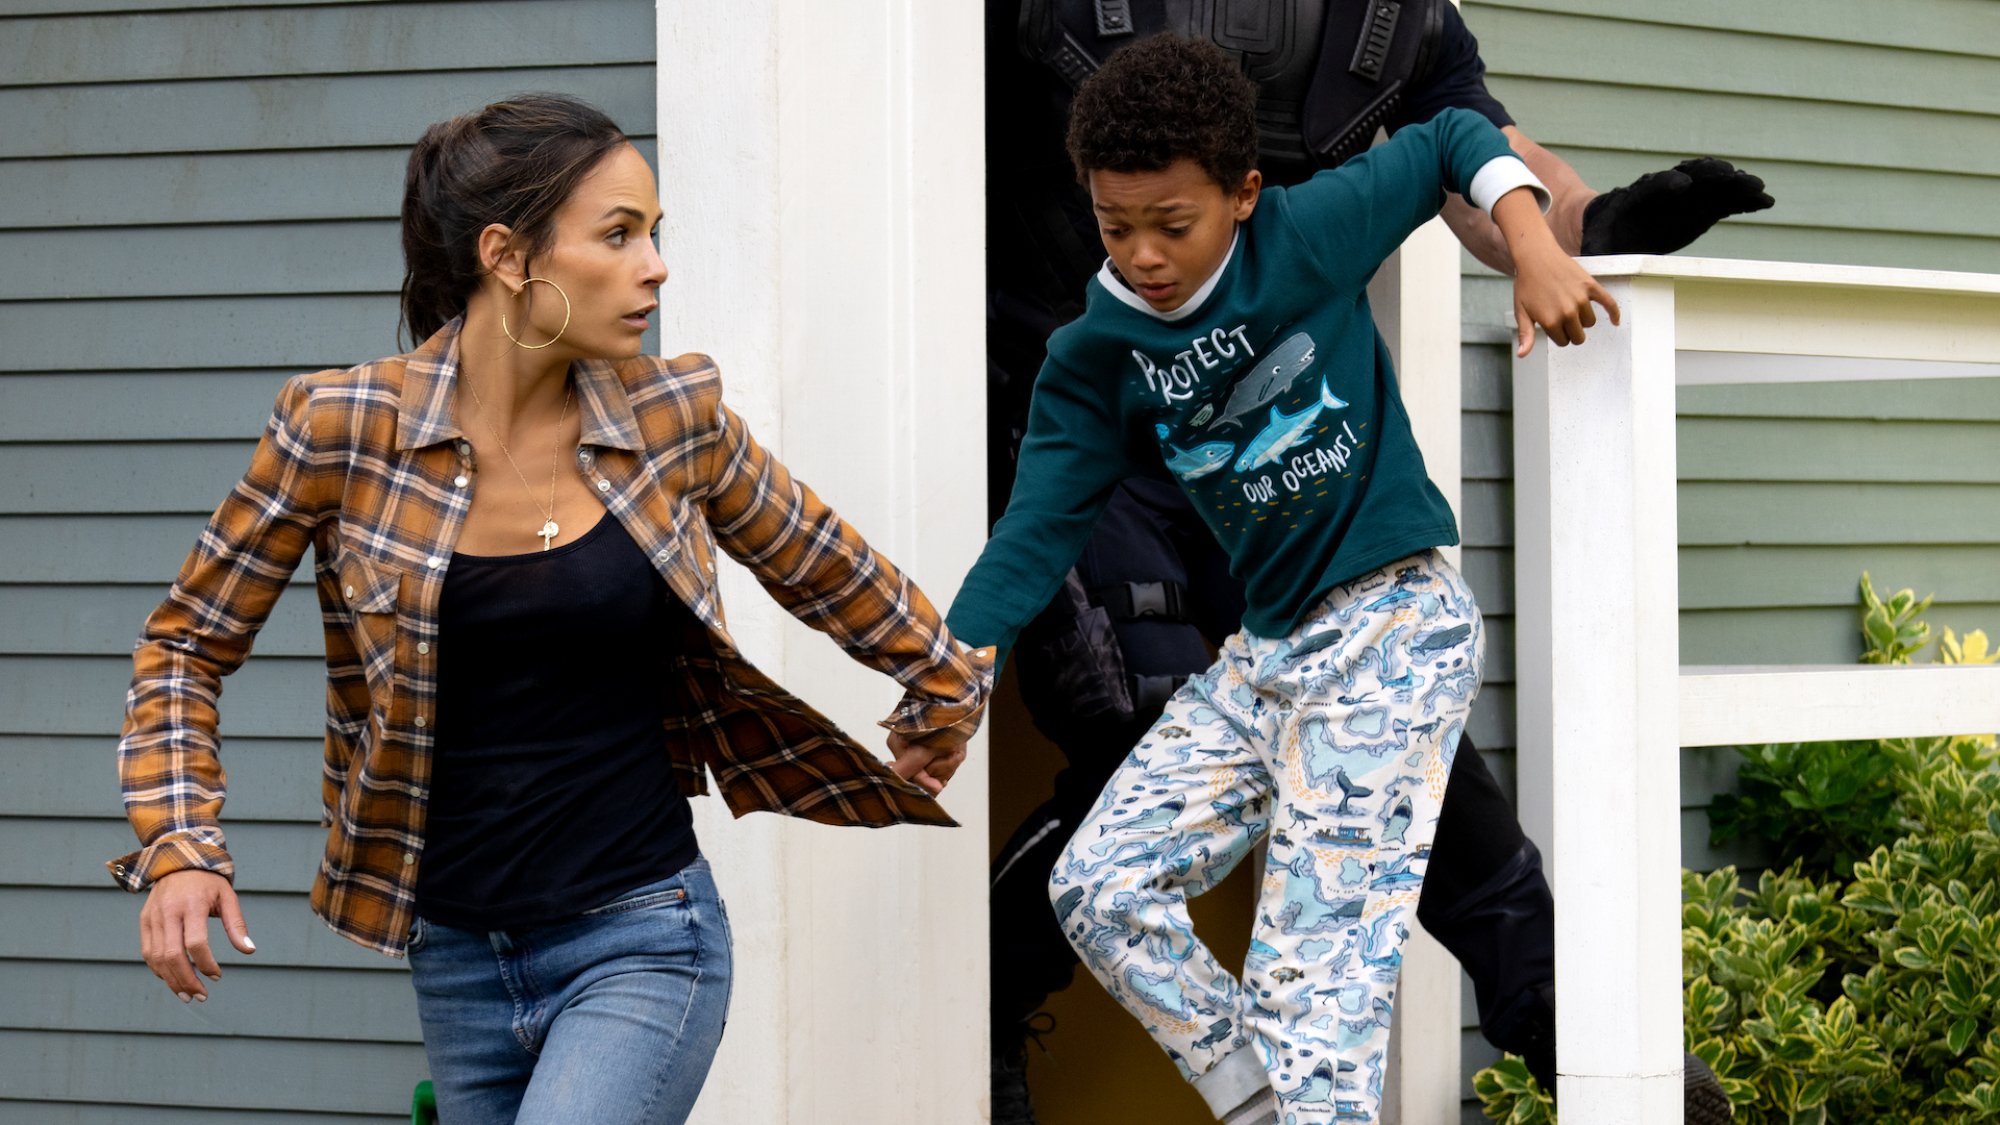 Jordana Brewster takes Leo Abelo Perry by the hand running out of a house in the film "Fast X."